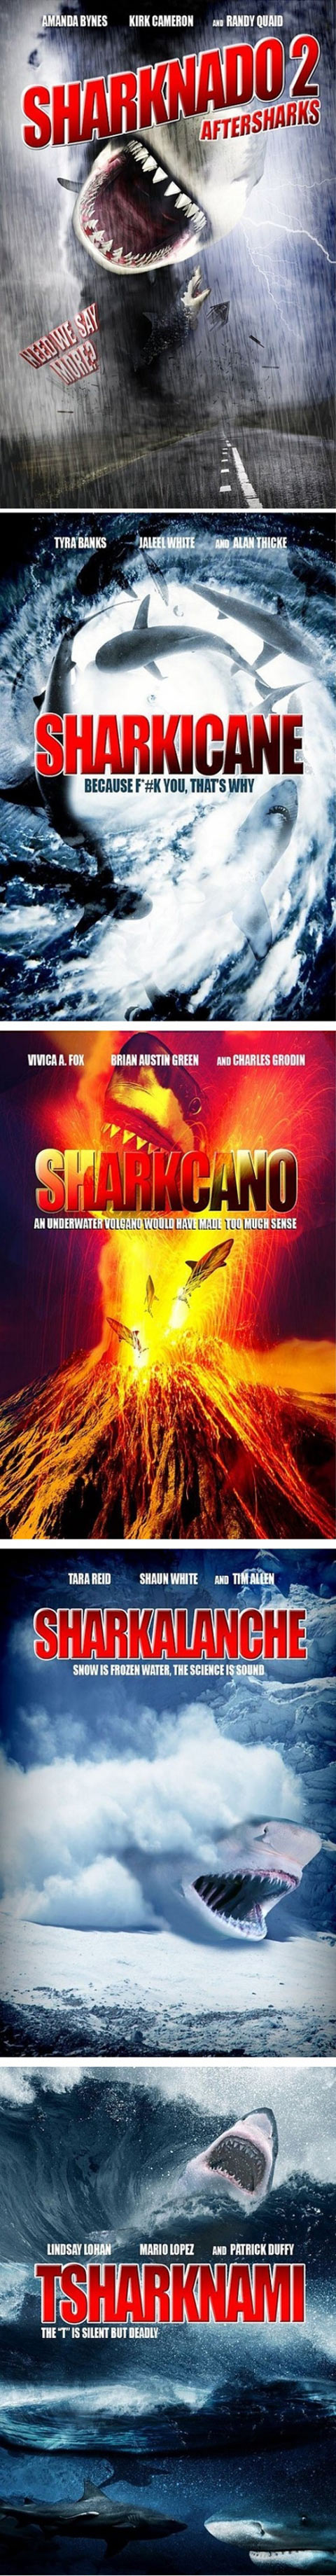 Possible sequels to Sharknado…